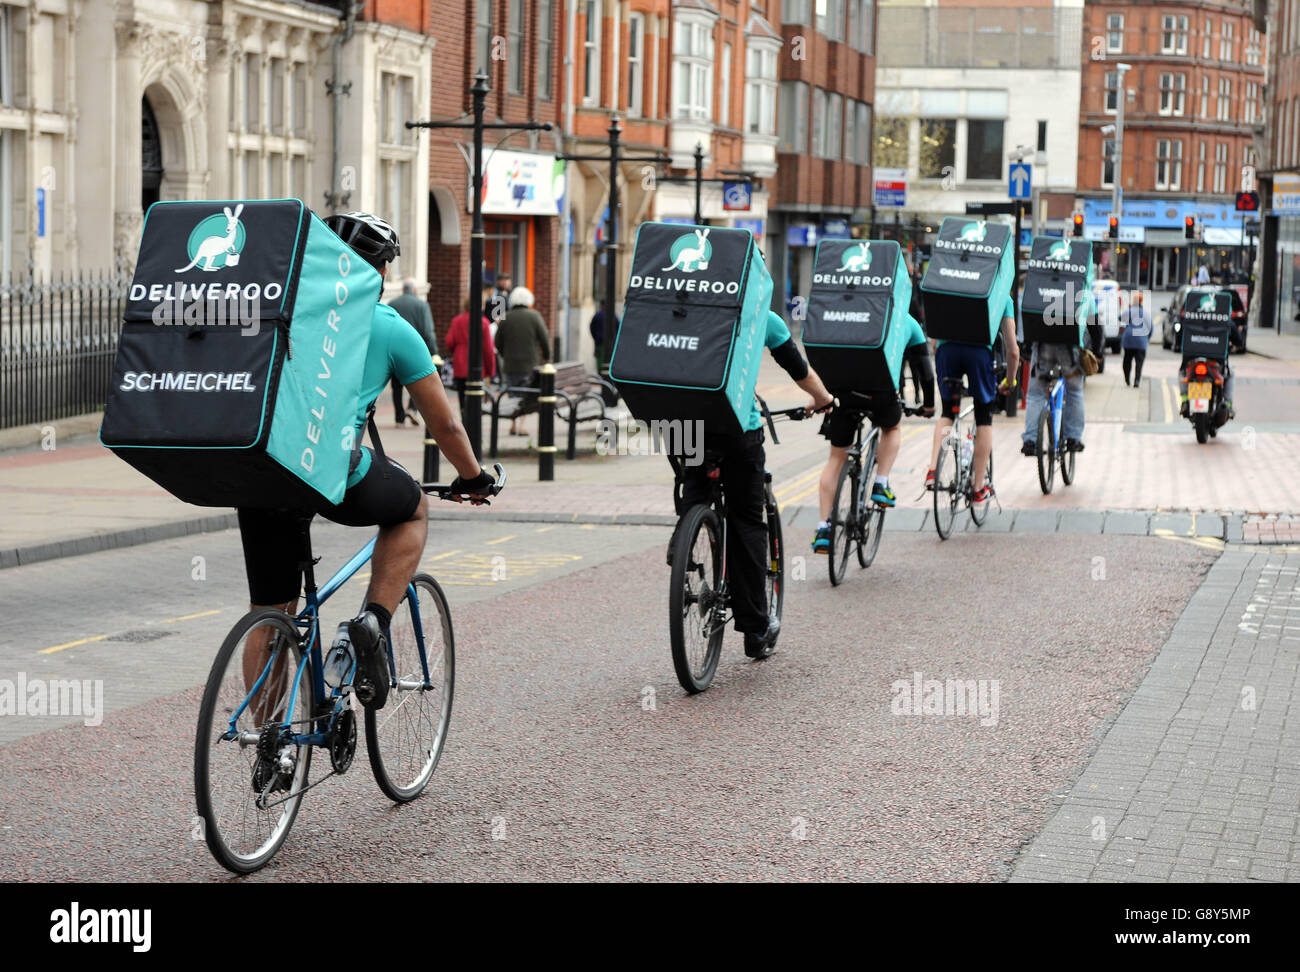 A team of Deliveroo riders named after Leicester City FC players sets off from Peter Pizzeria in Leicester to deliver freebies to football fans in celebration of the club winning the Barclays Premier League, ahead of the team lifting the trophy this weekend. Stock Photo